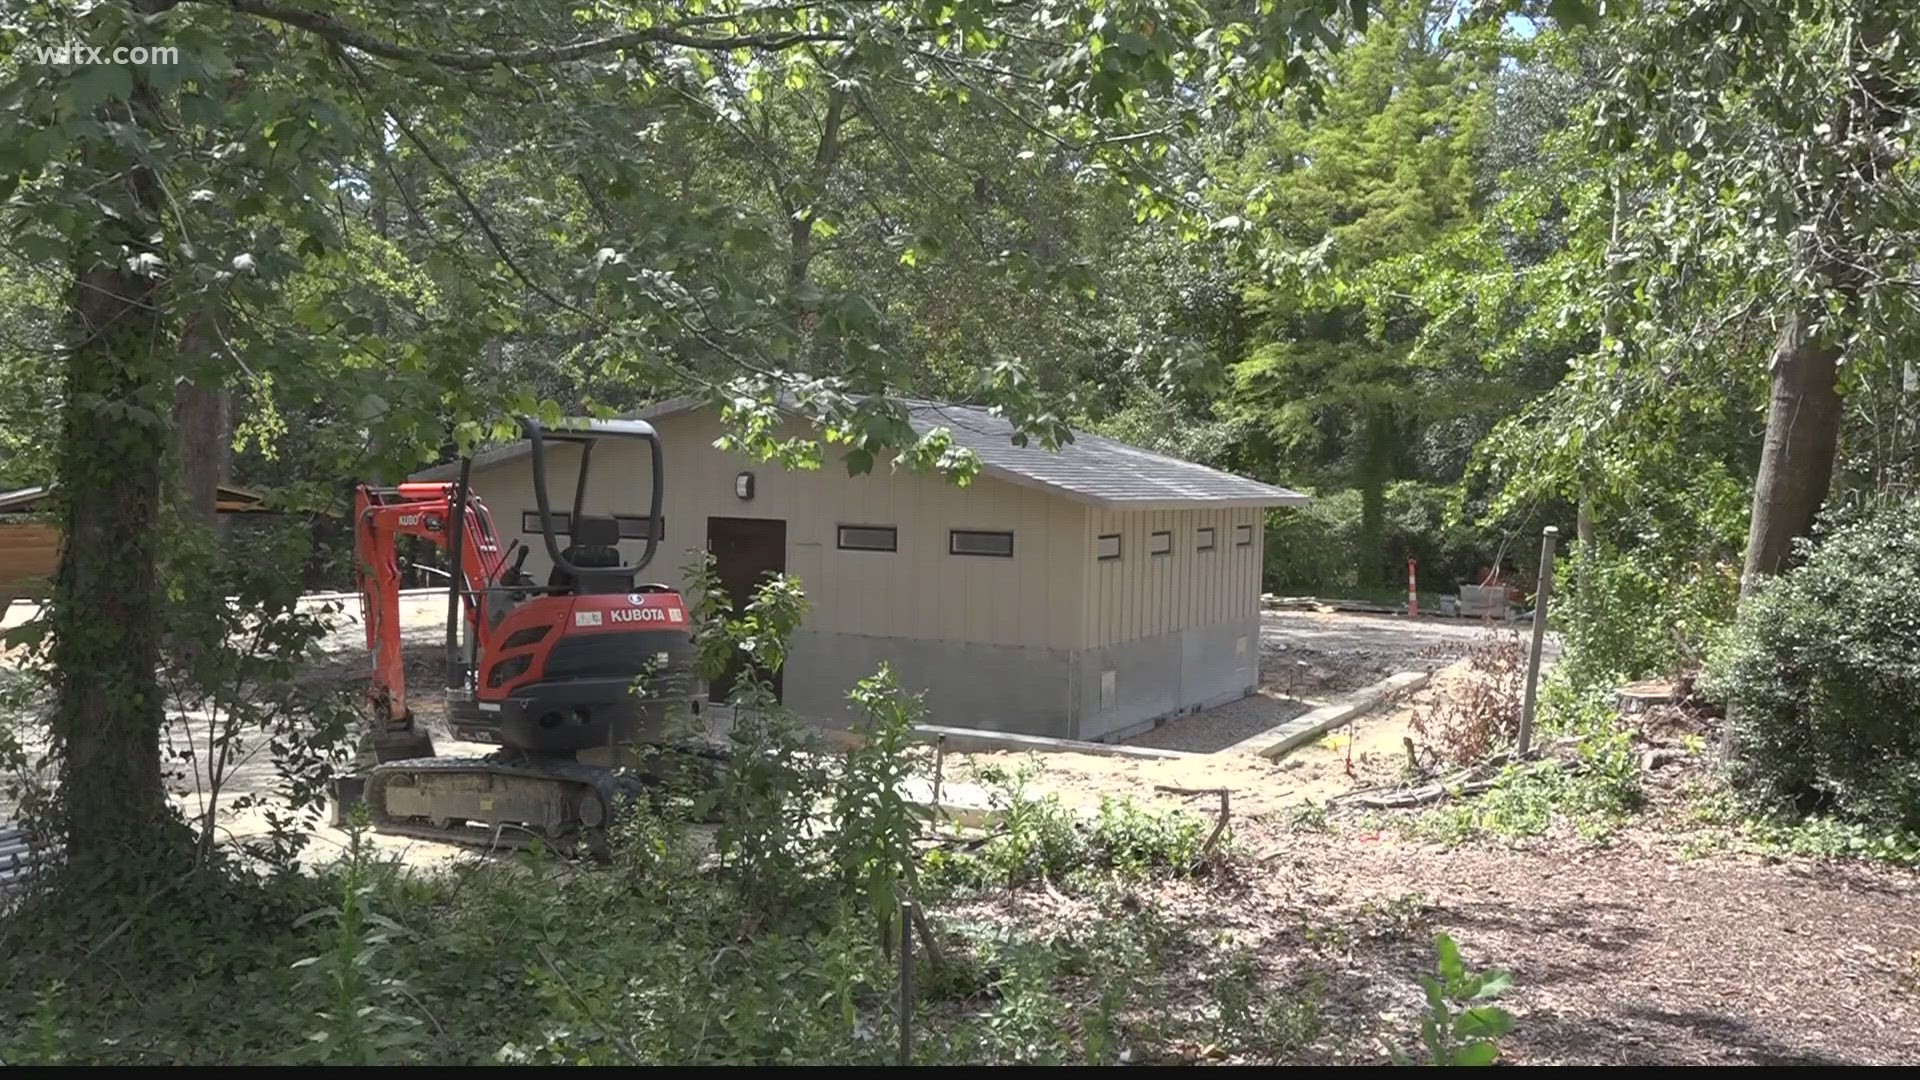 Renovations continue at Virginia Hylton Park in the town of Lexington. 
It's been about a year since they started.